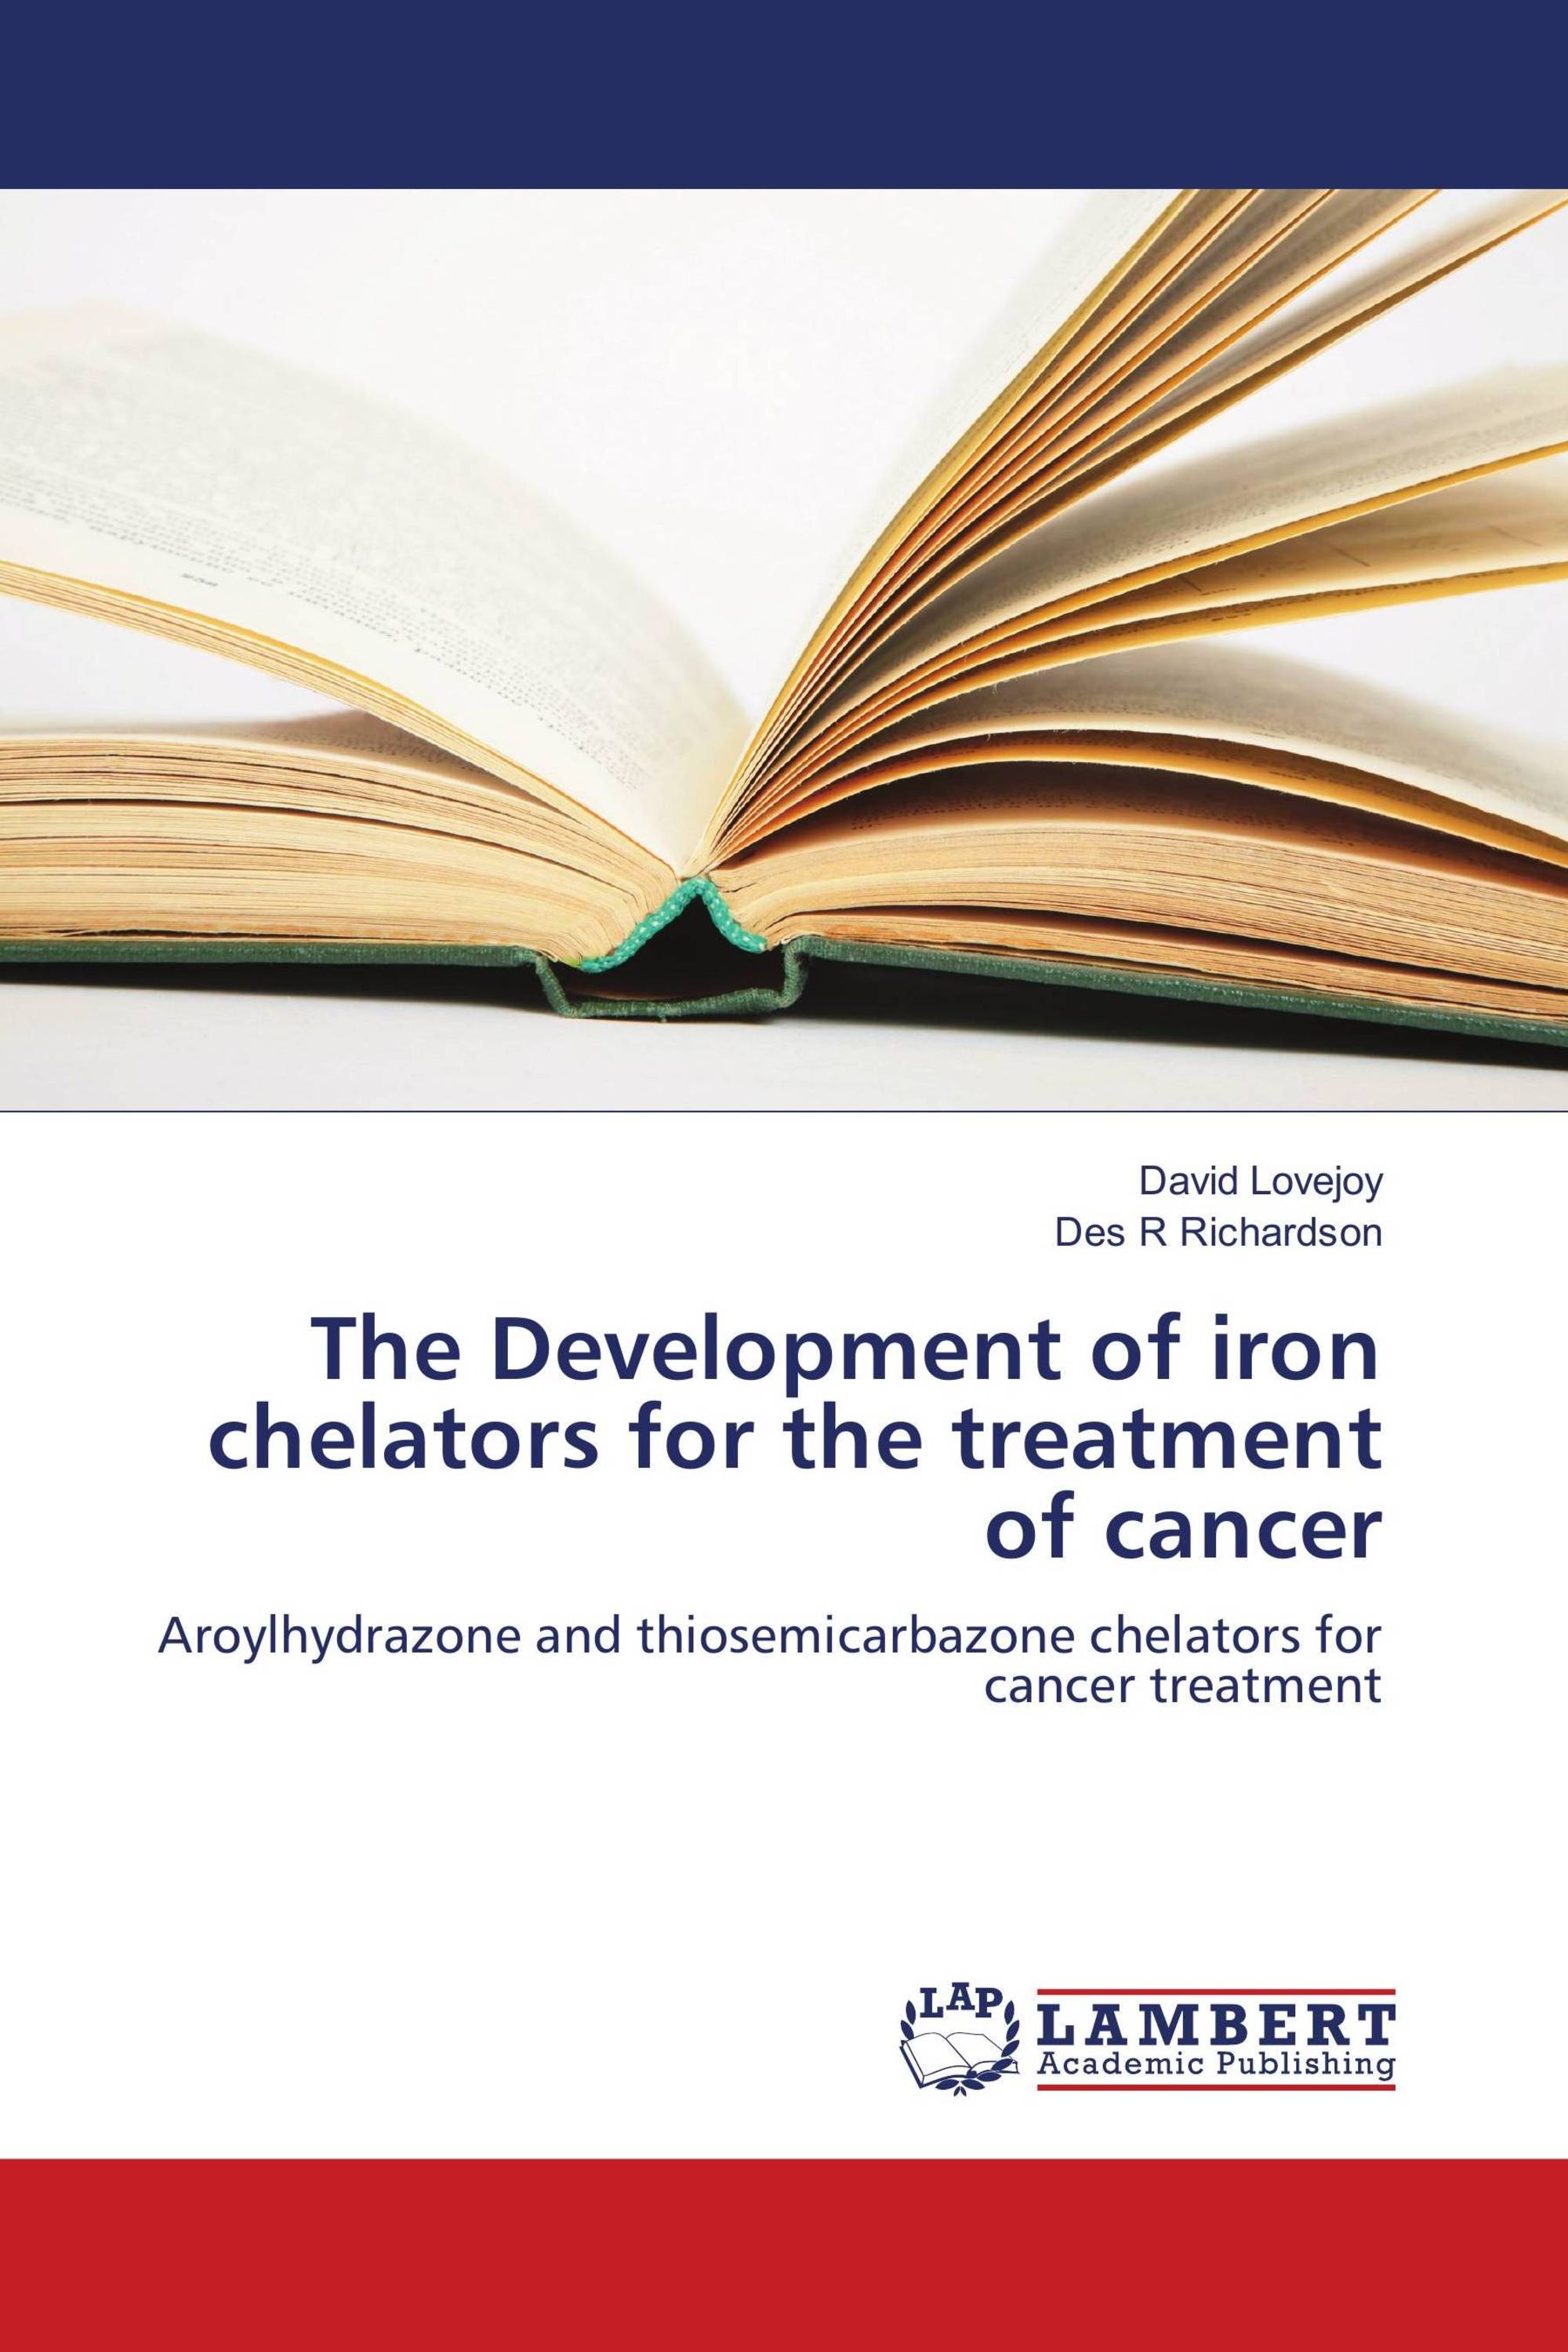 The Development of iron chelators for the treatment of cancer